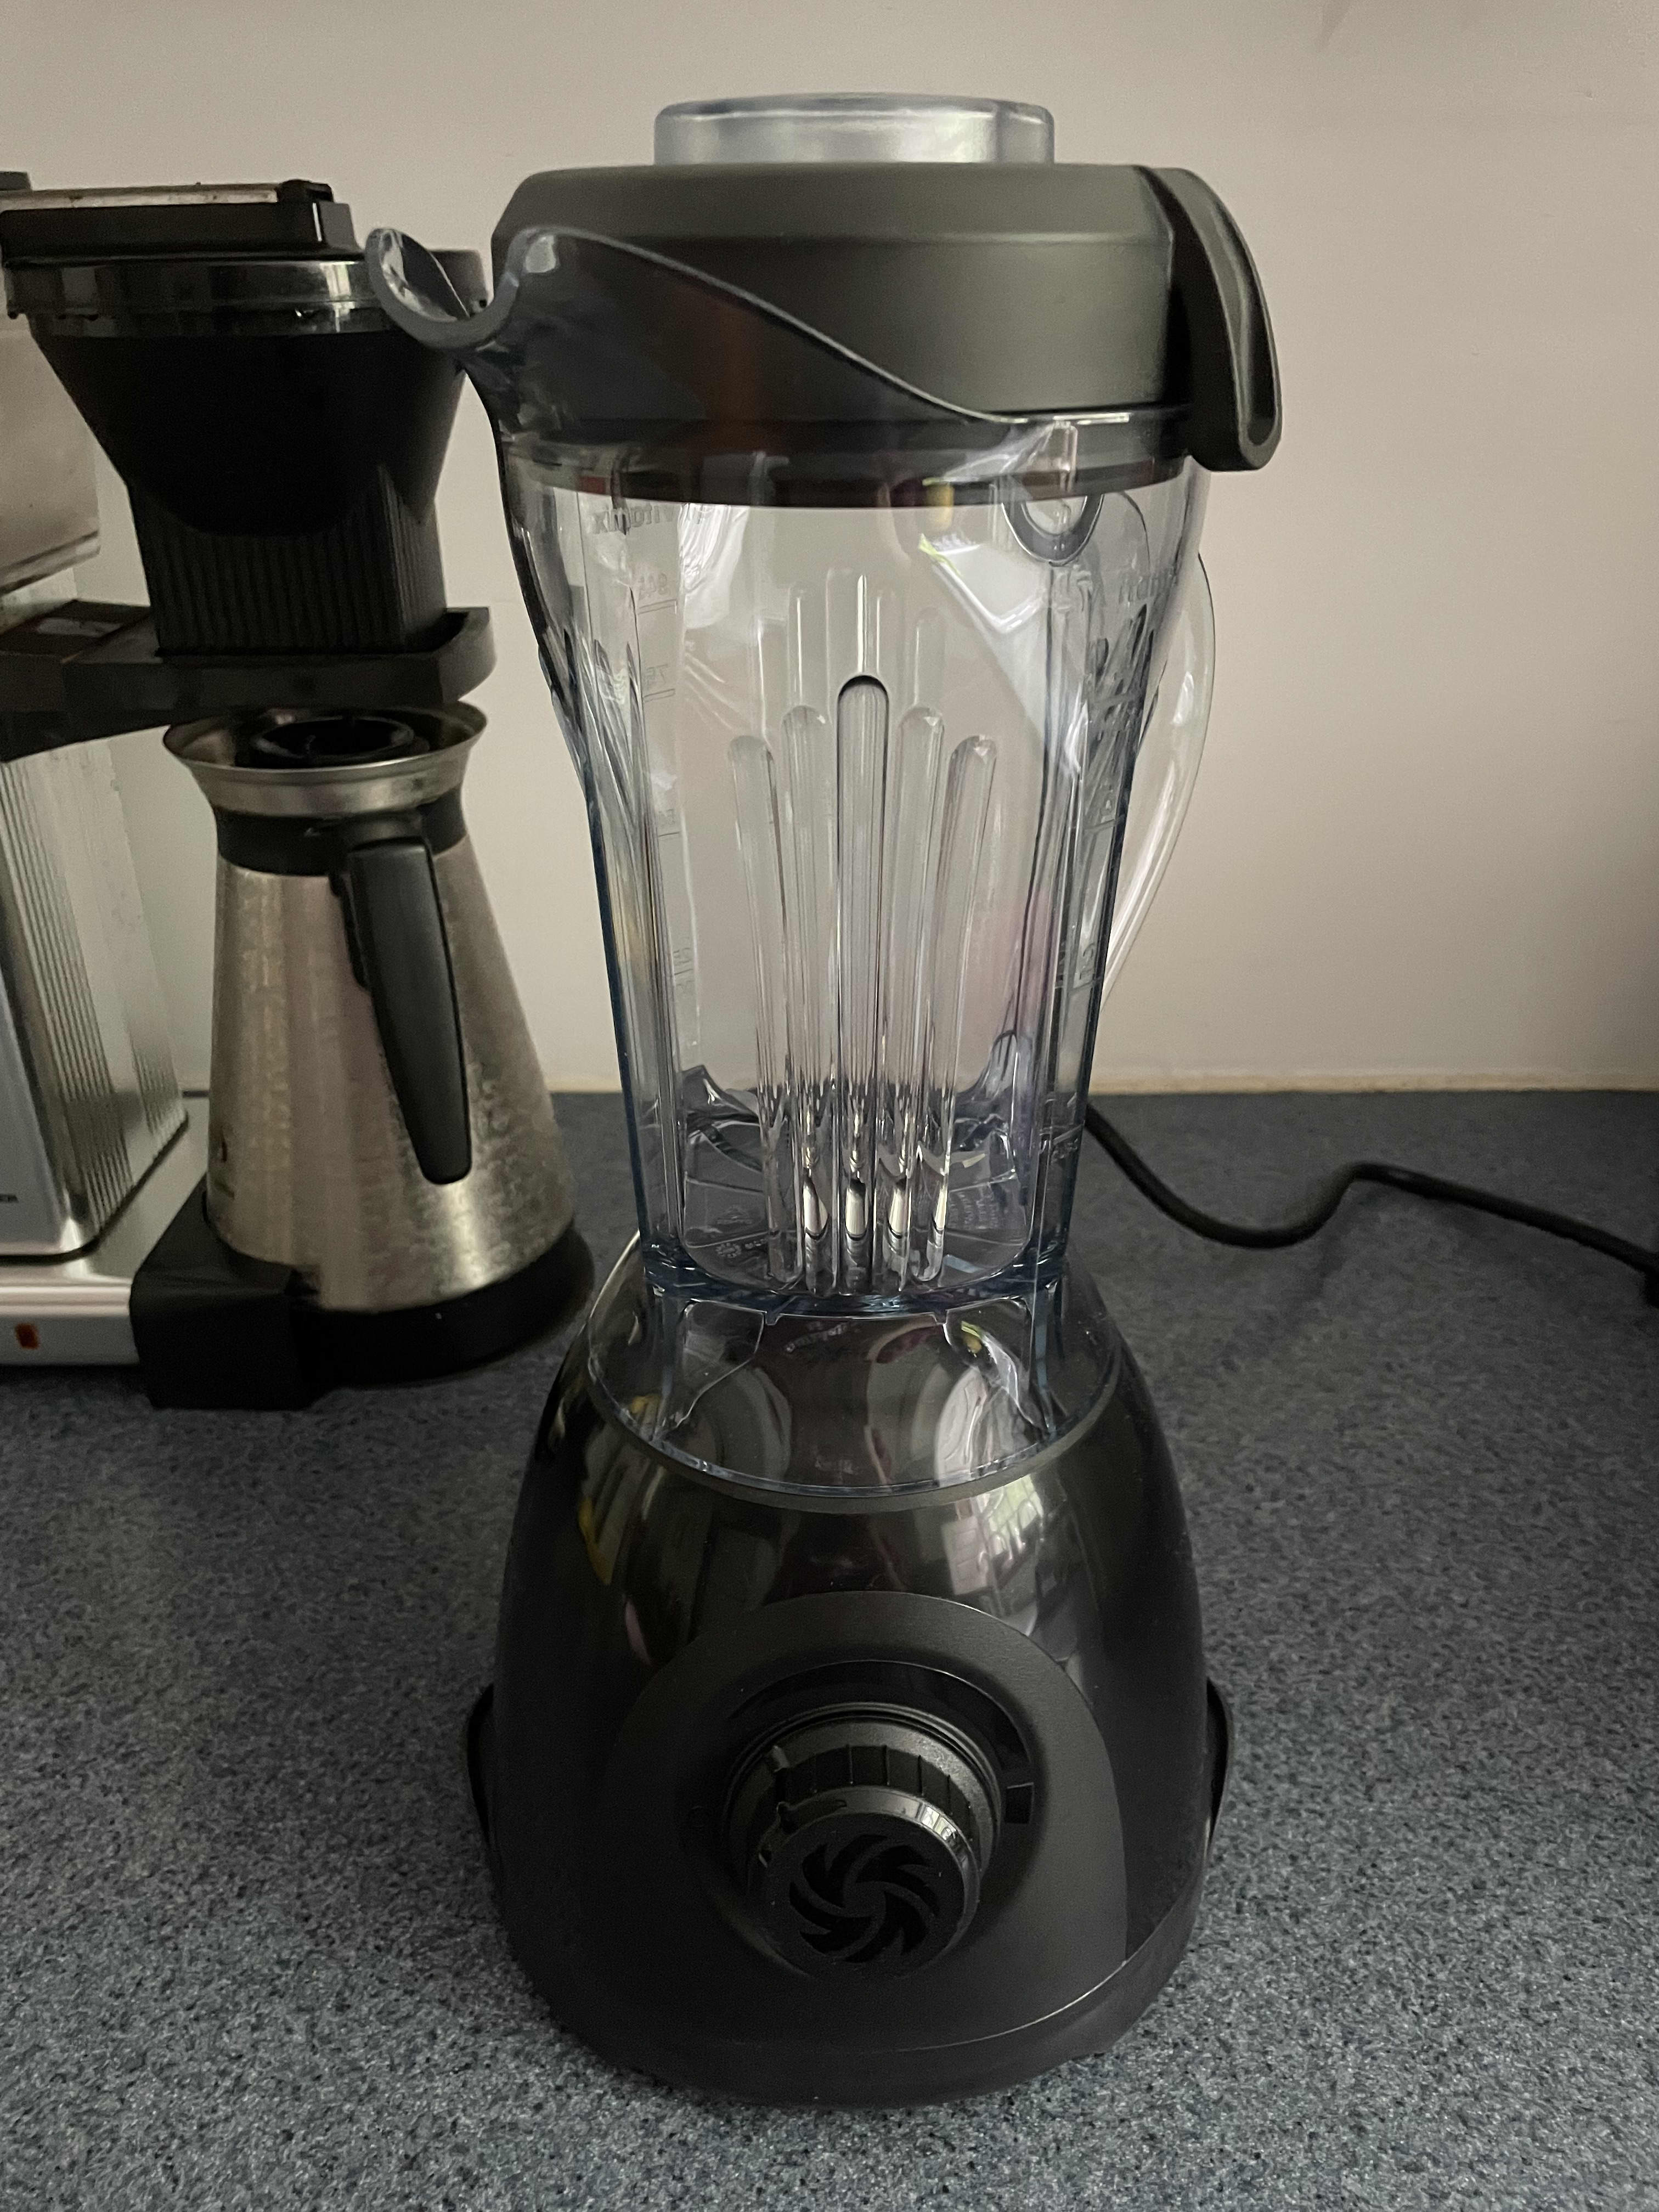 Vitamix One Review: Compact, Pared-Down, and Still Powerful